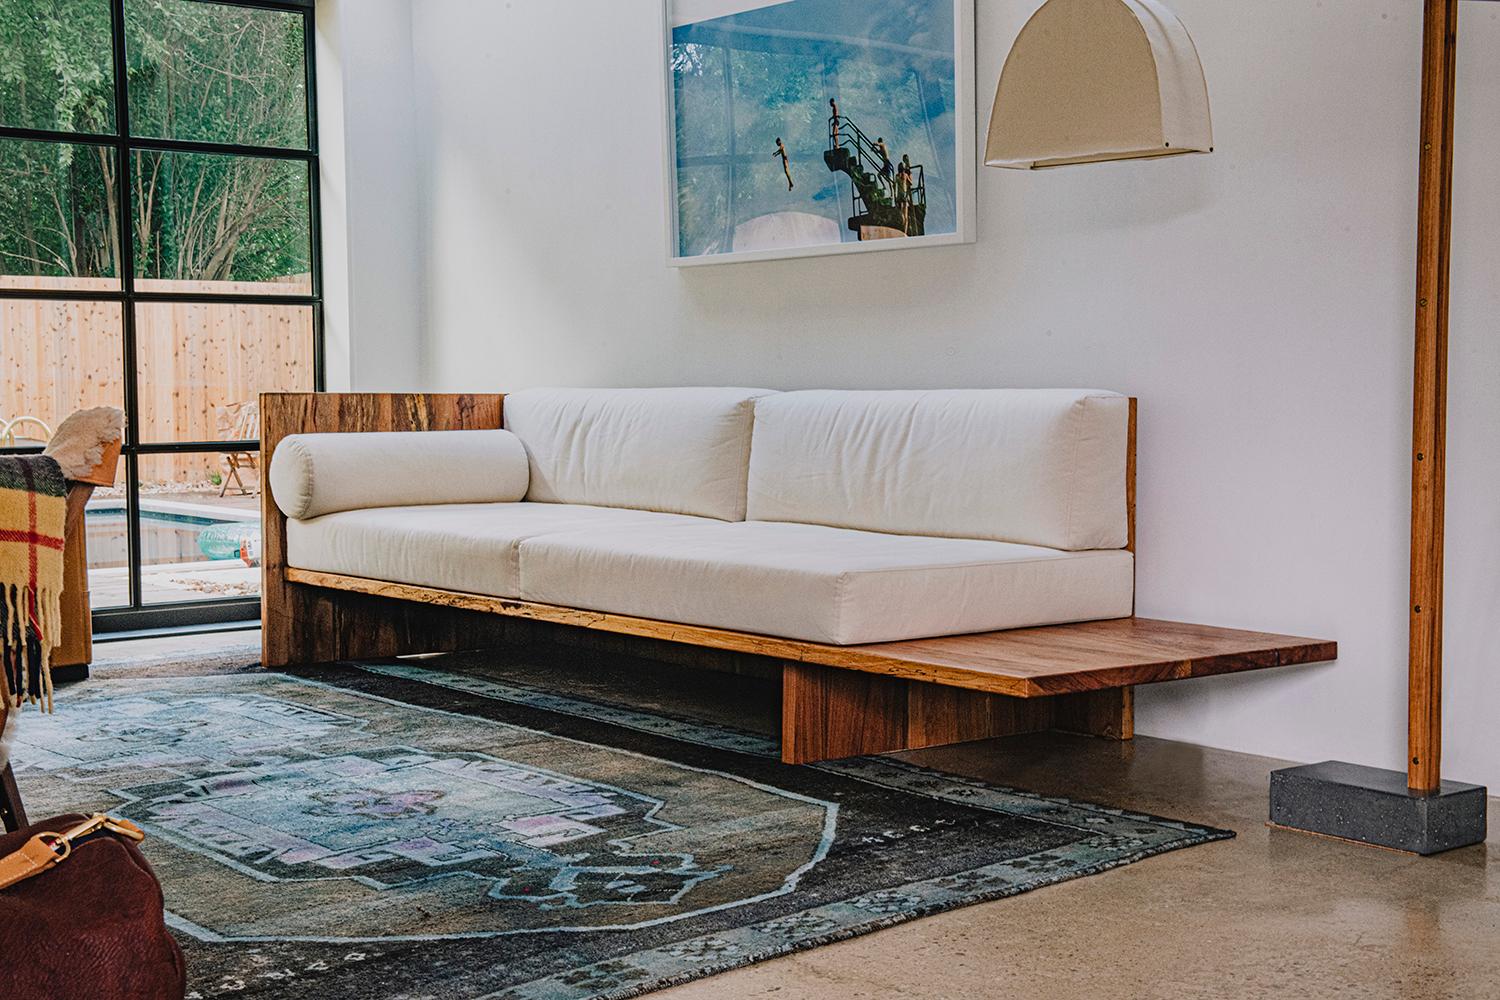 The Humphreys sofa draws inspiration from the organic minimalism of Donald Judd’s daybed. The shape is left open on the right side, designed to be intentionally long for two people to lay comfortably. It follows the same ethos as the brand's Taylor